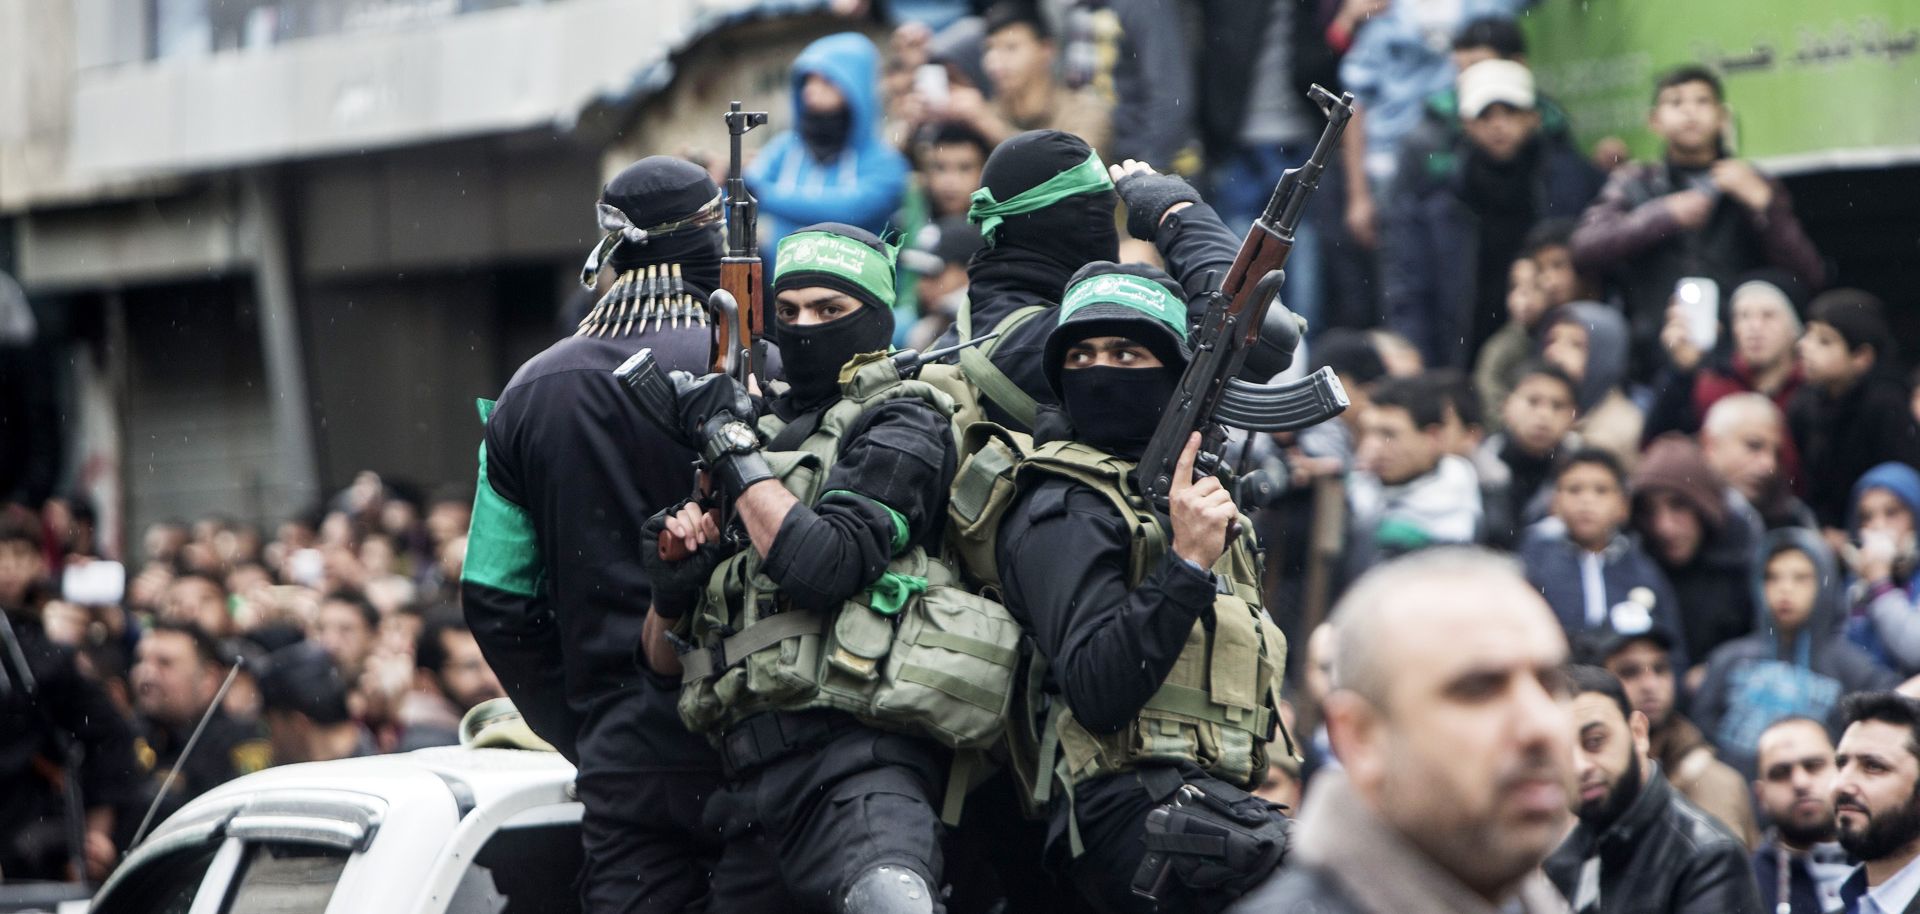 Members of the Izz al-Deen al-Qassam Brigades, Hamas' military wing, take part in a Dec. 14 rally in Gaza City marking Hamas' 29th anniversary. A blockade by Islamic State in the Sinai Peninsula has cut weapons supplies to the Palestinian group.